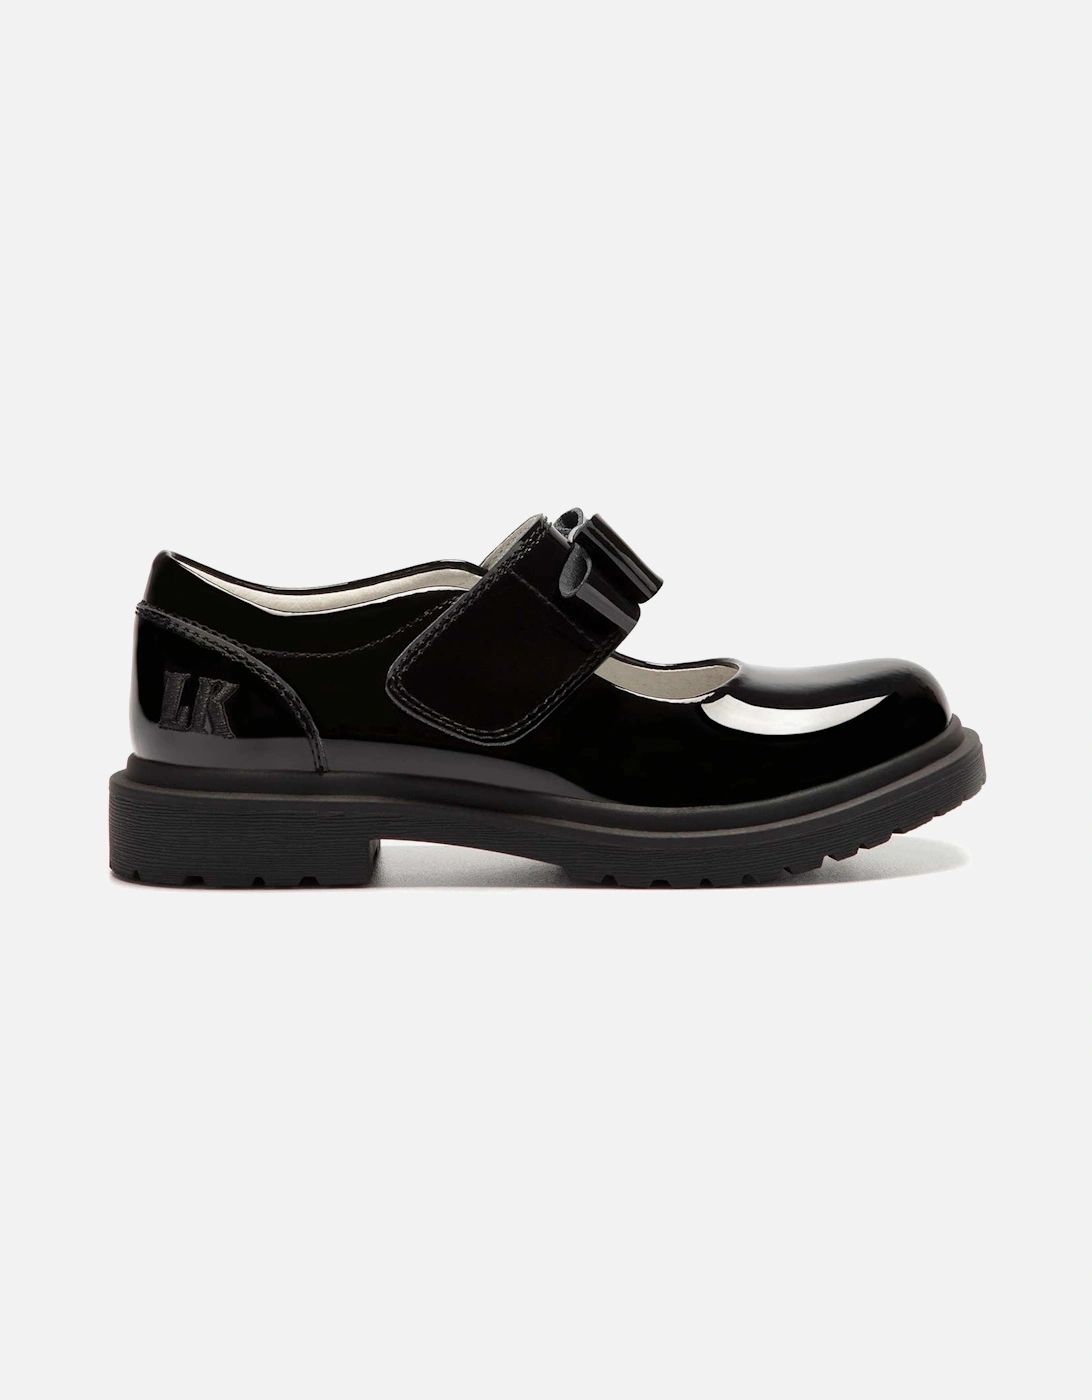 Lelly Kelly Juniors Helen Patent Shoes (Black)